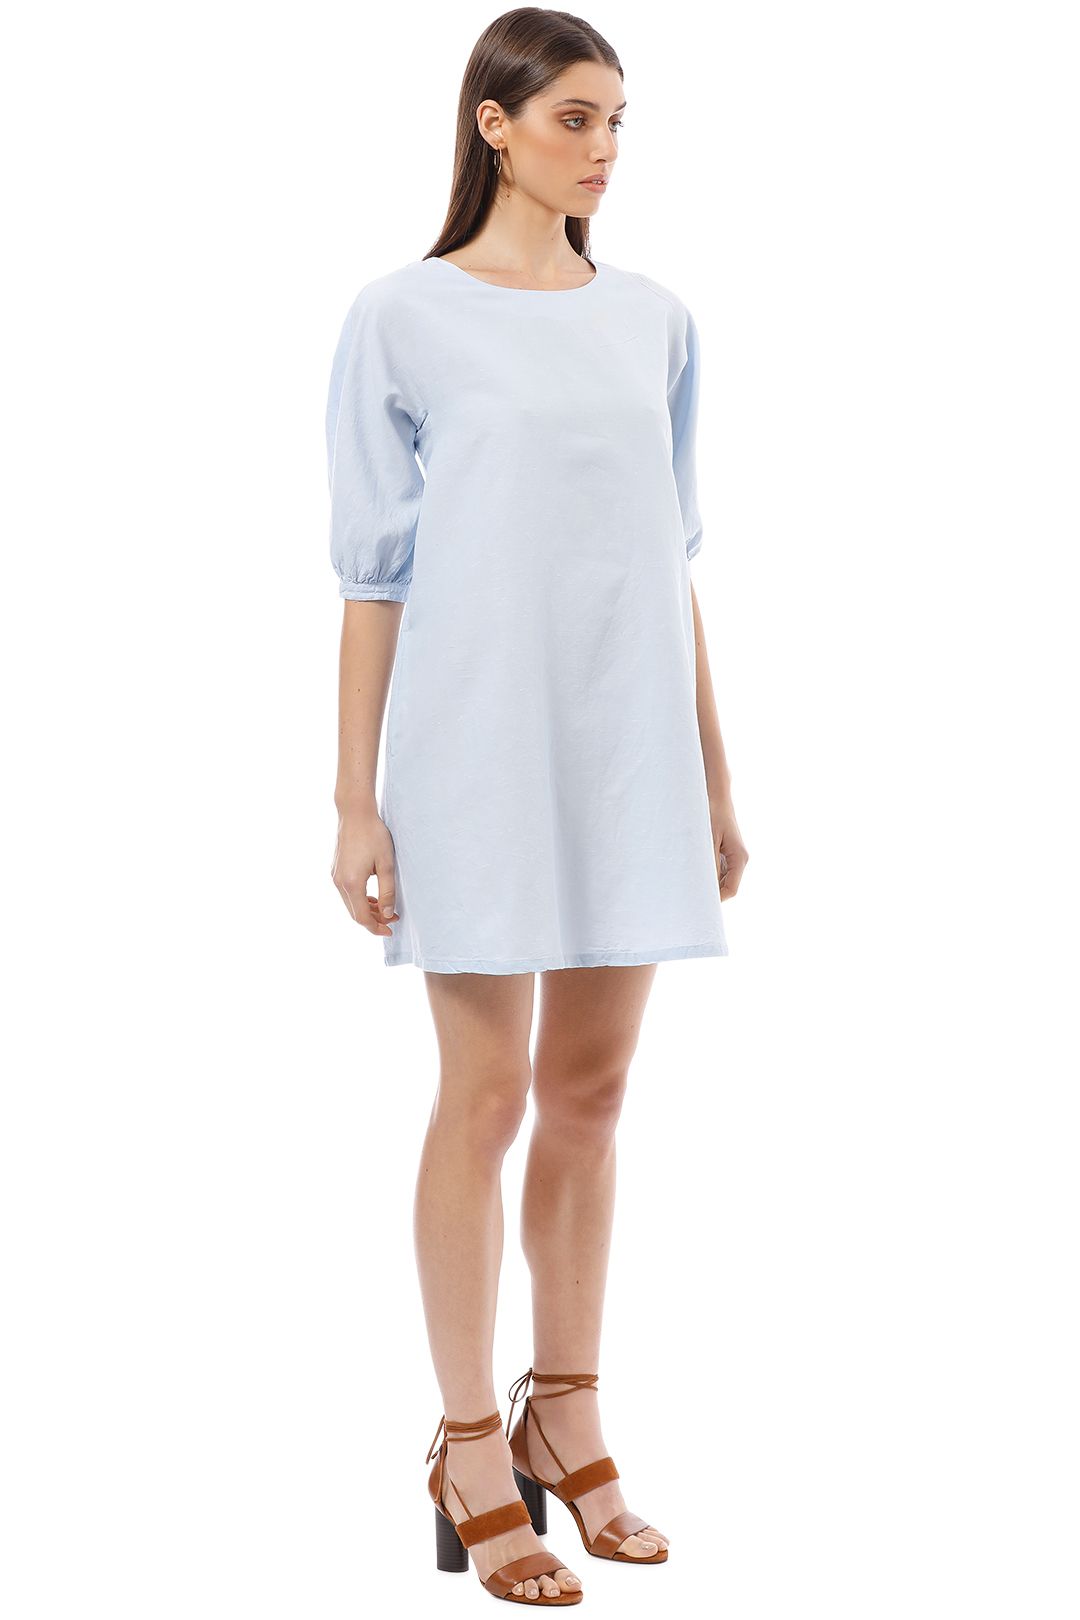 Max and Co - Delfi Dress - Blue - Side